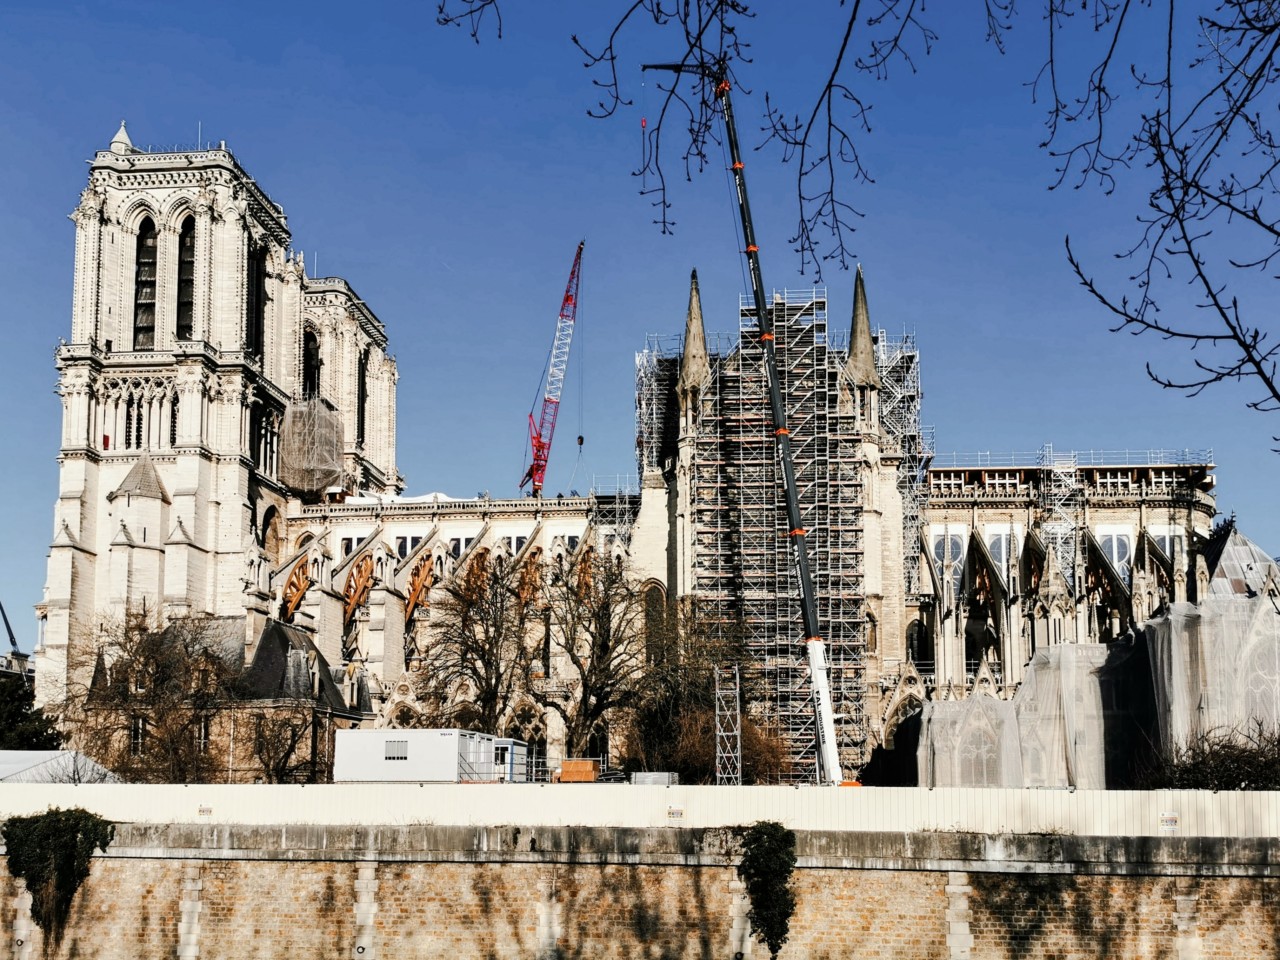 Notre Dame Cathedral, sans spire, surrounded by scaffolding